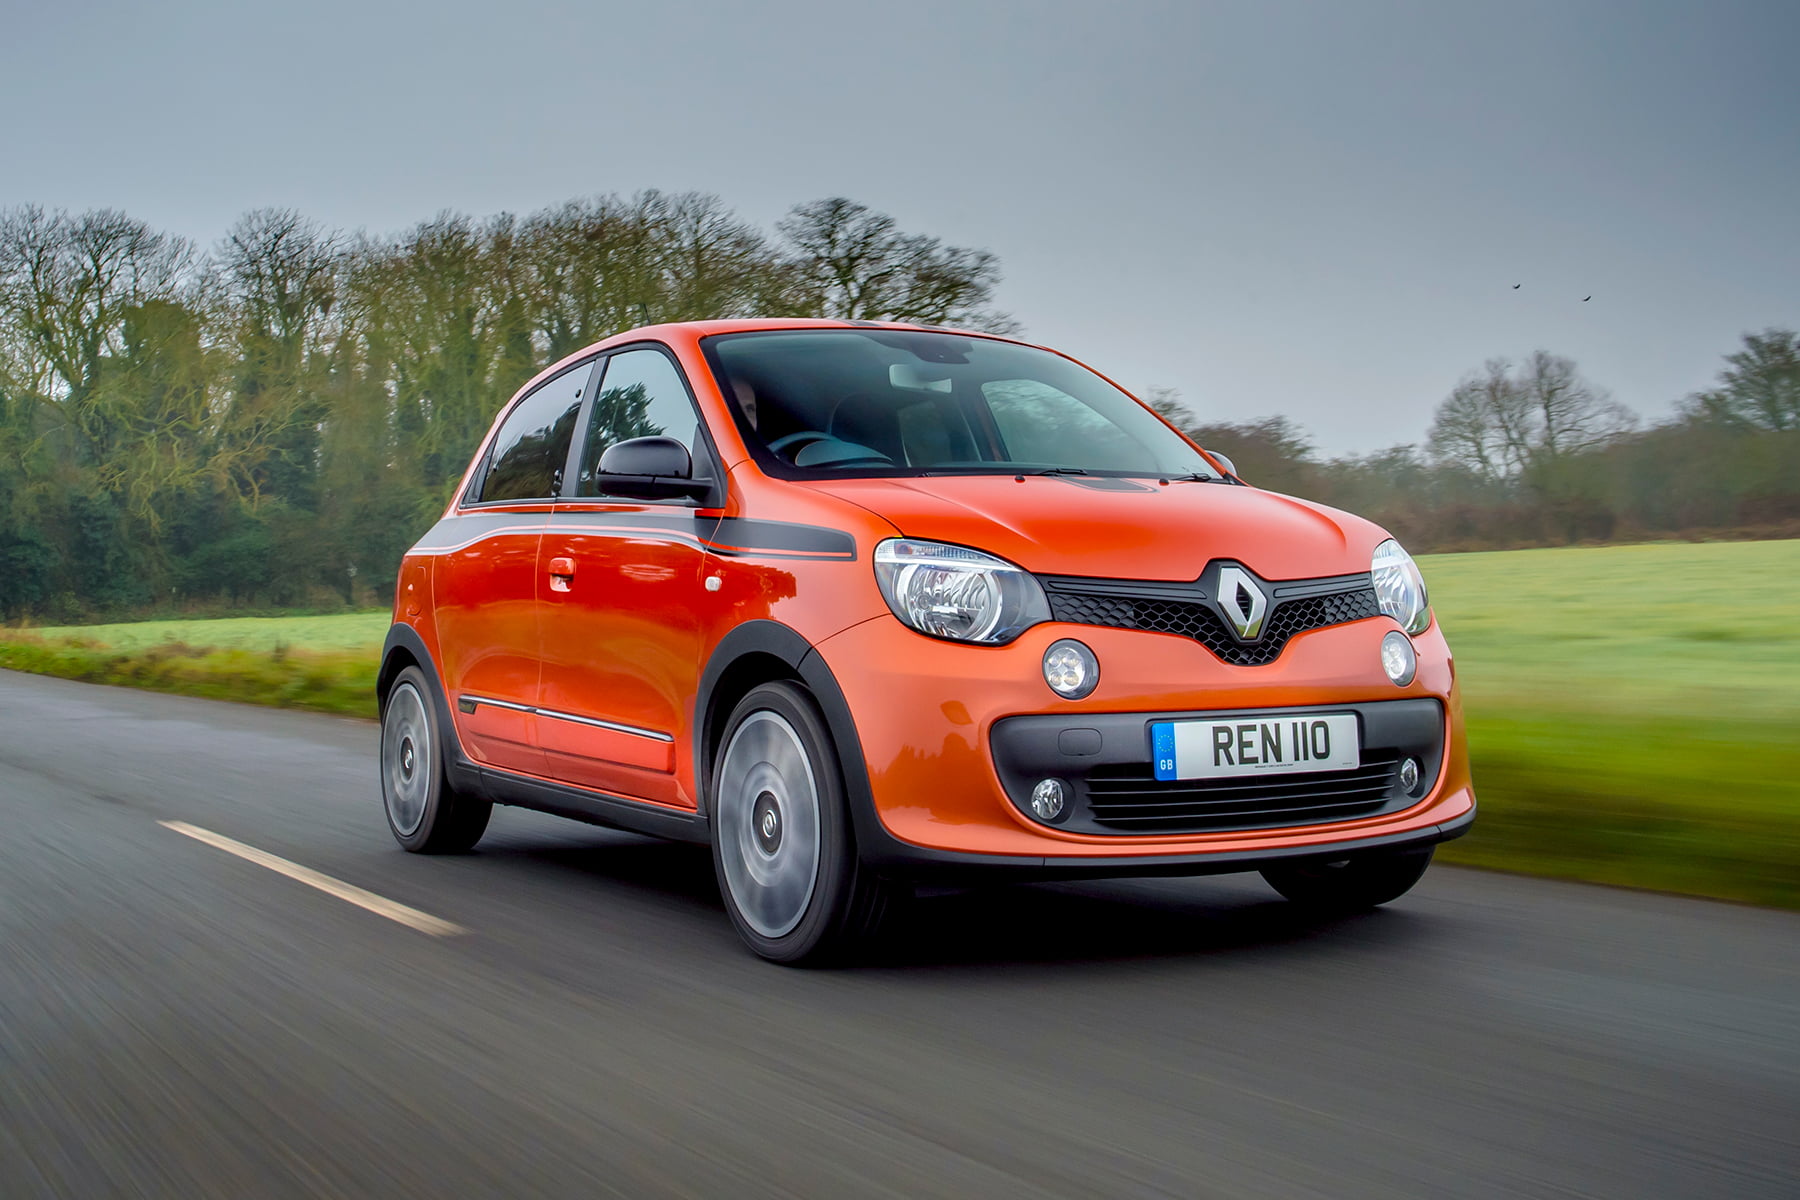 Renault Twingo front view | Expert Rating